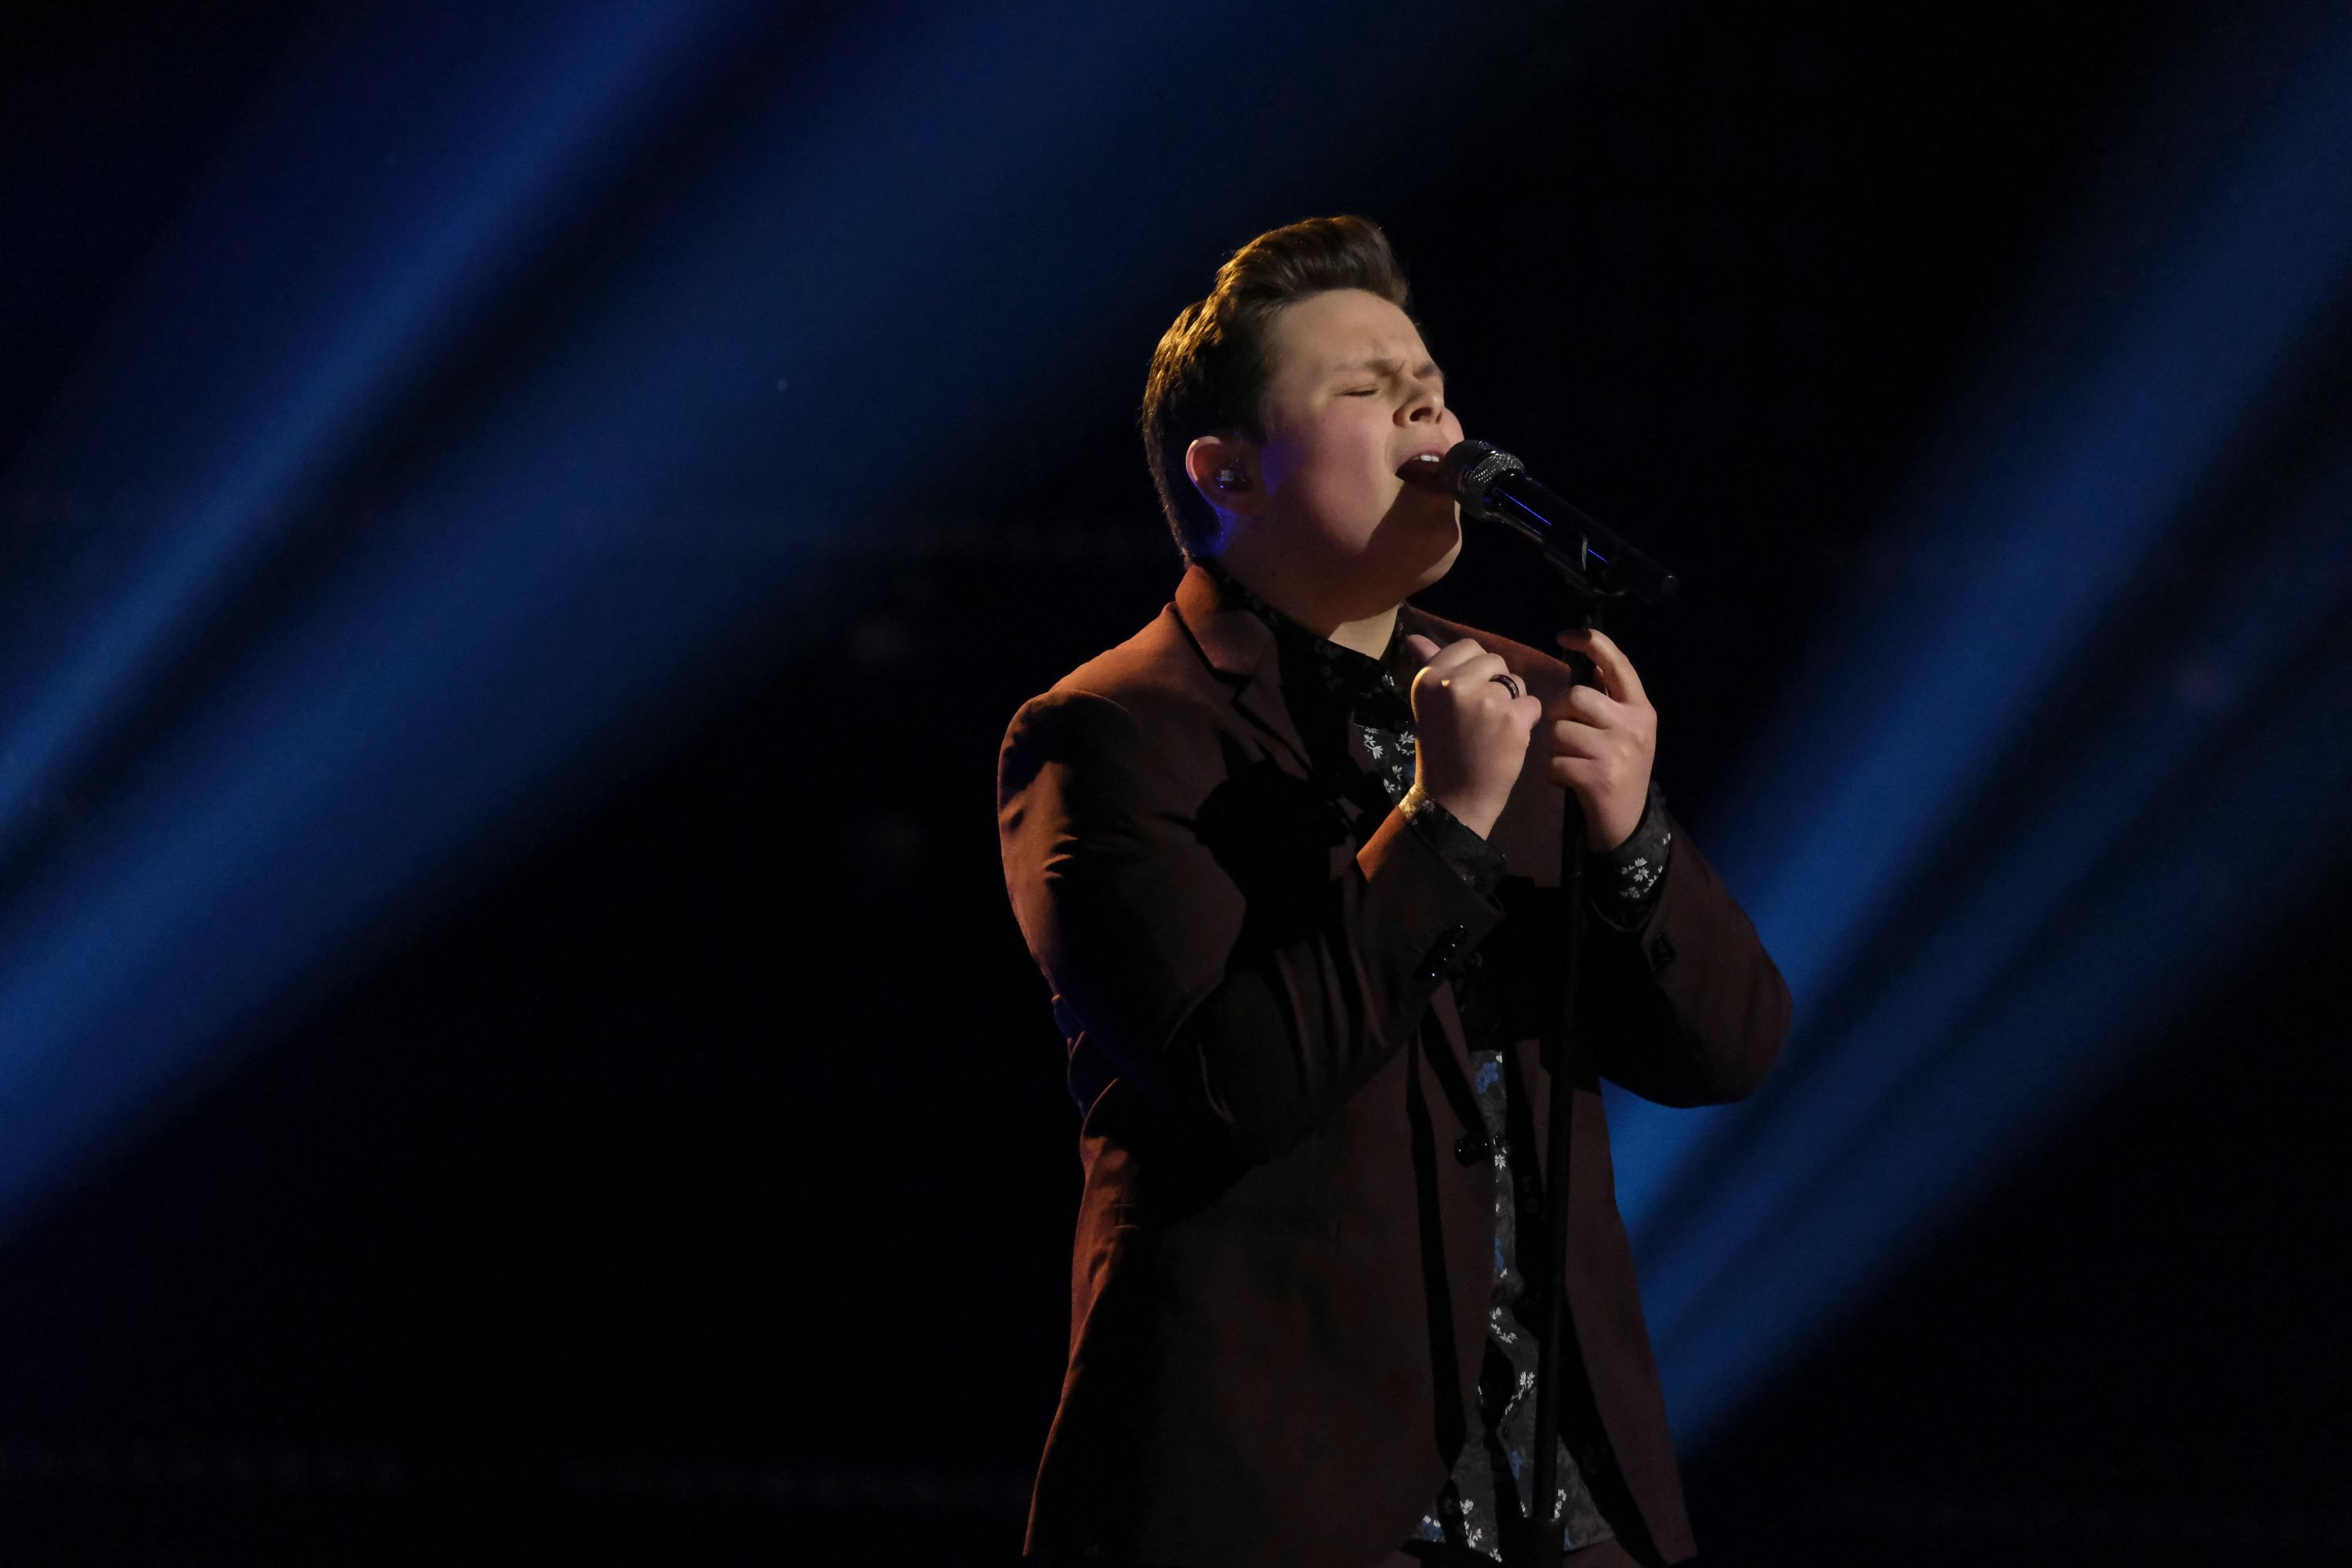 Carter Rubin singing on season 19 of "The Voice" Live Top 17 performances on November 30, 2020 | Photo: Getty Images